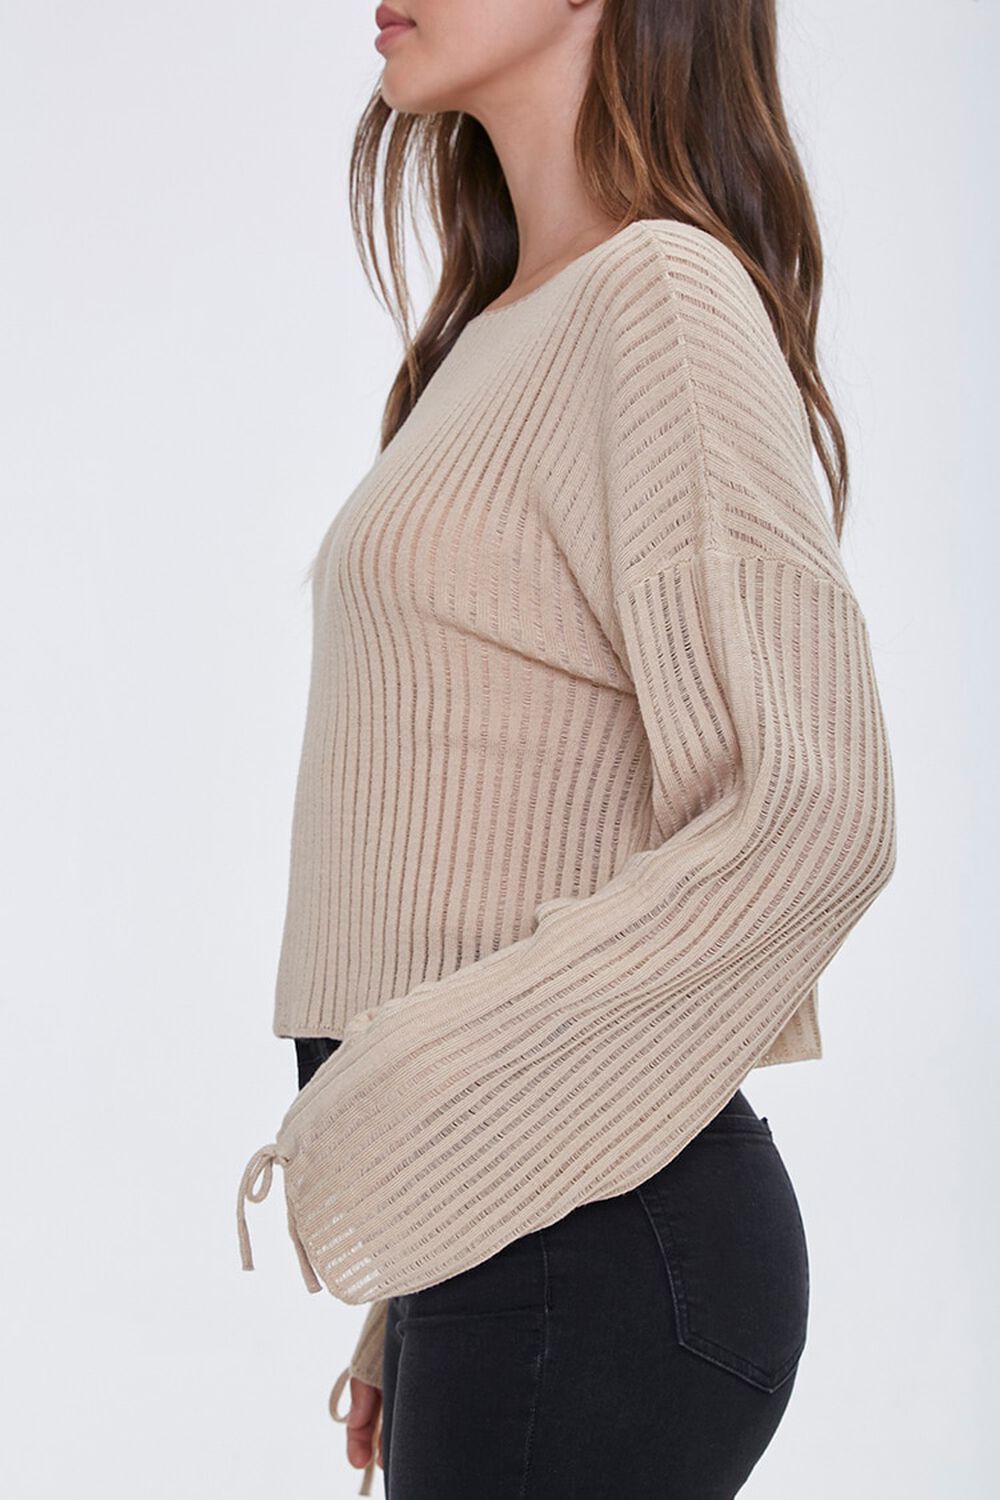 TAUPE Shadow-Striped Sweater, image 2